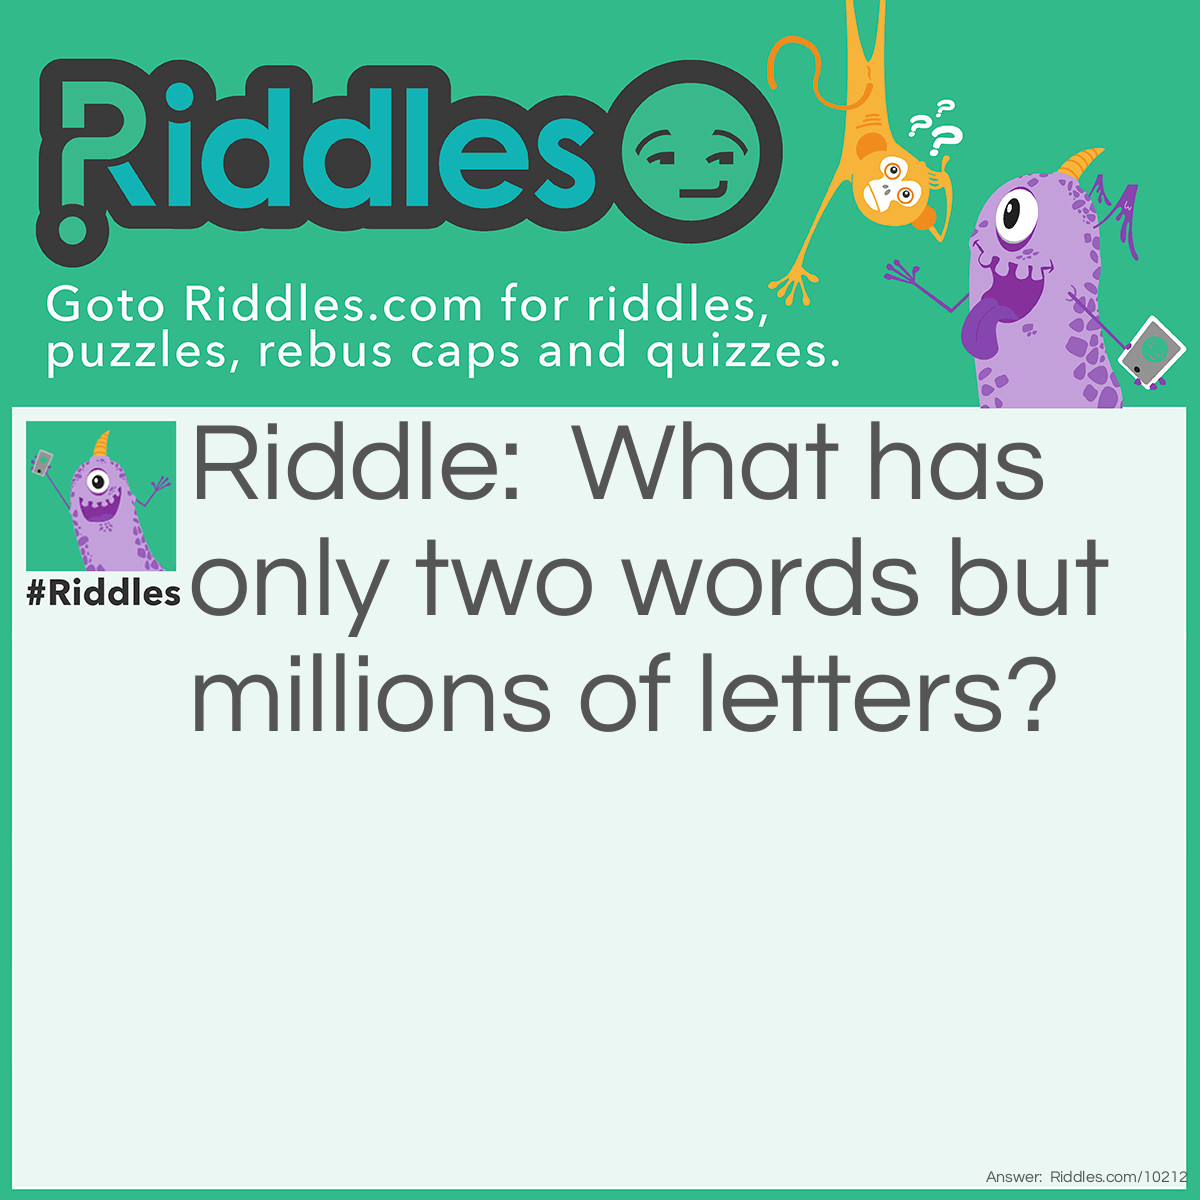 Riddle: What has only two words but millions of letters? Answer: Post Office